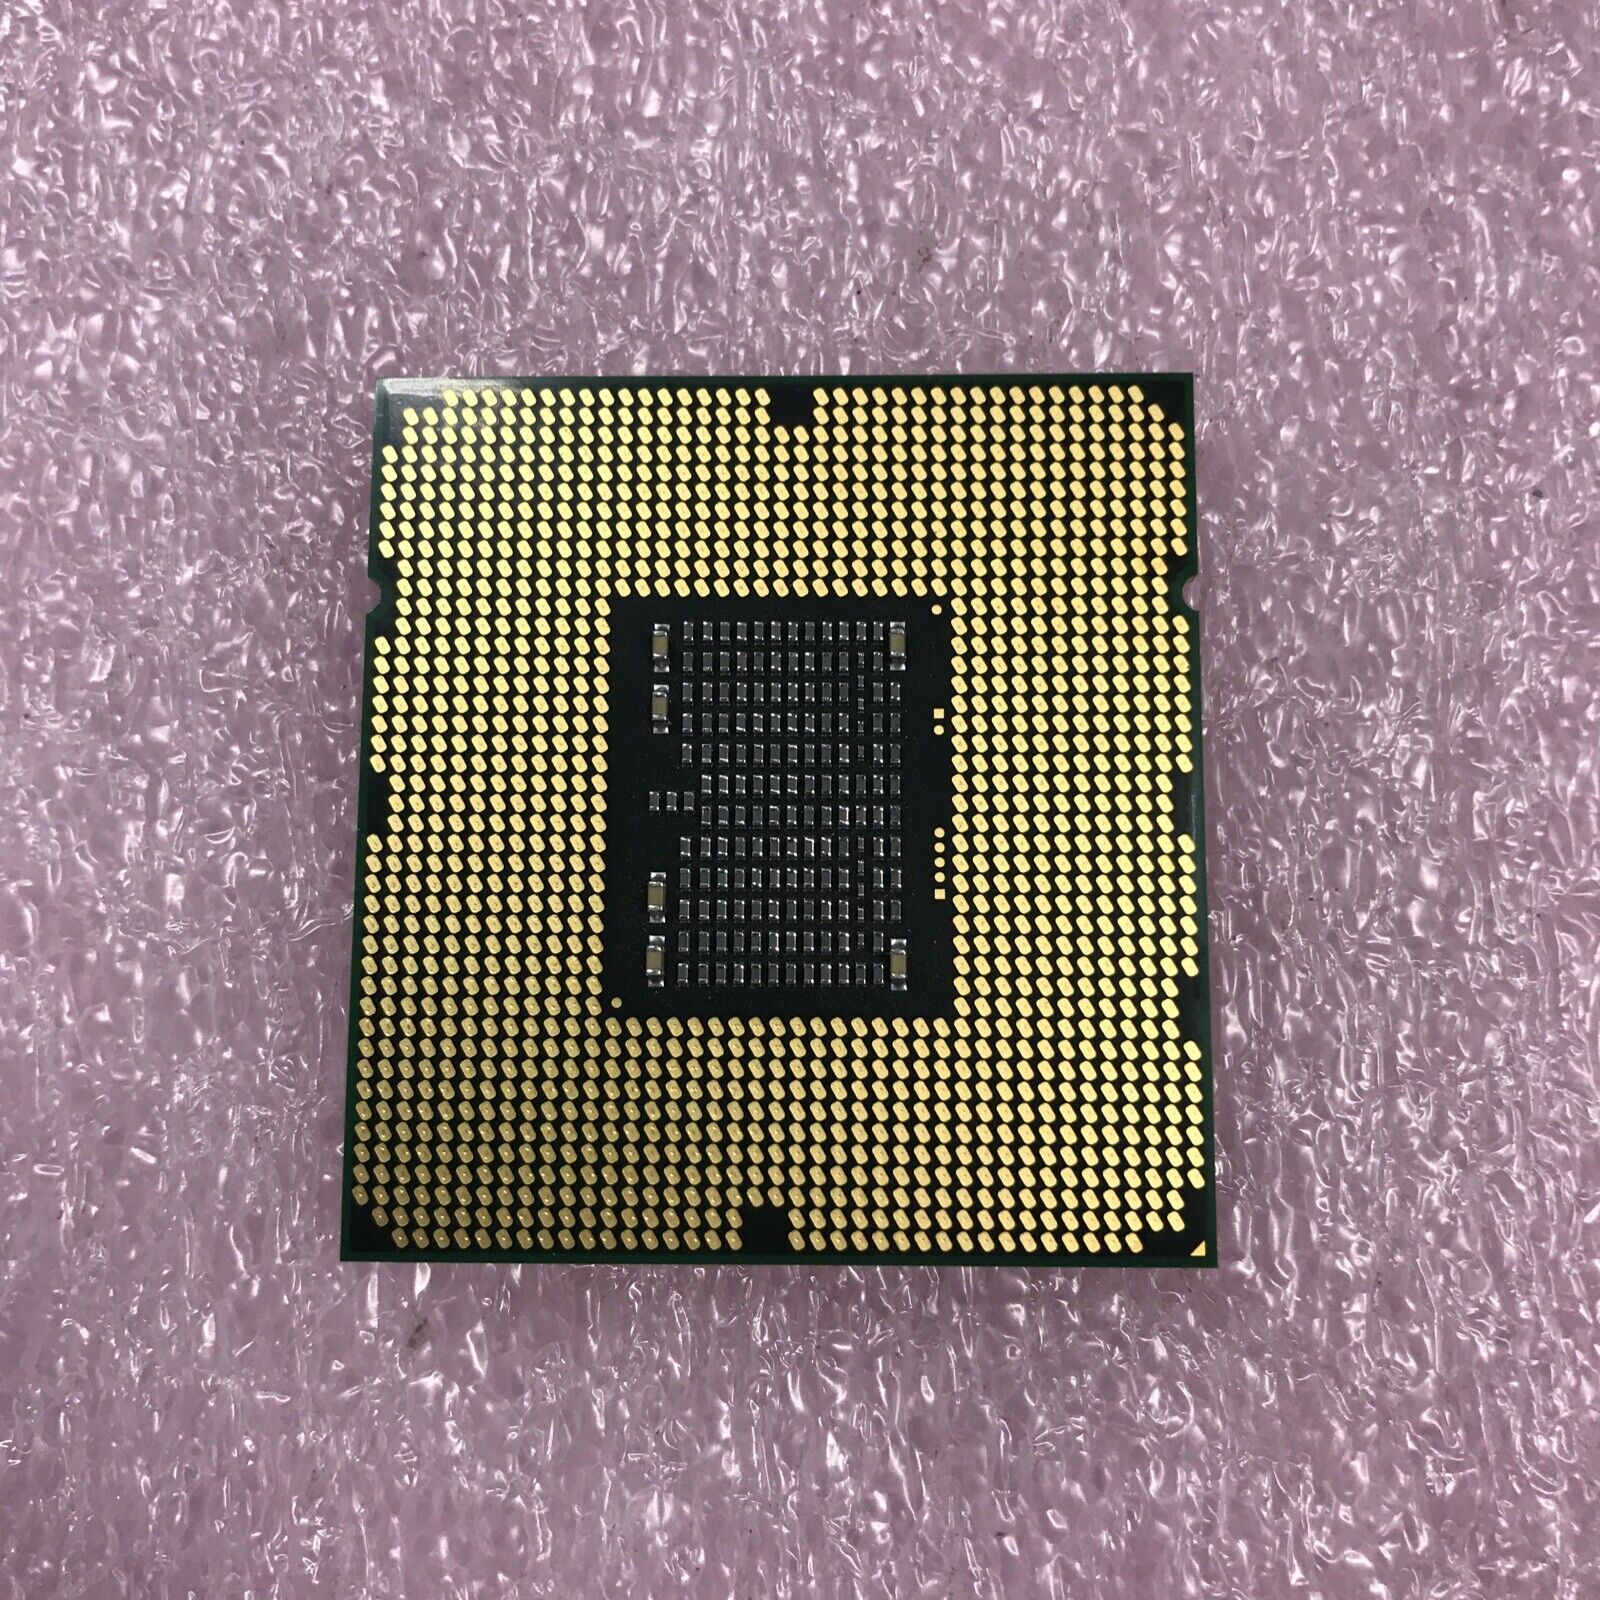 (Lot of 2) Intel E5649 SLBZ8 2.53GHz (Tested and Working)